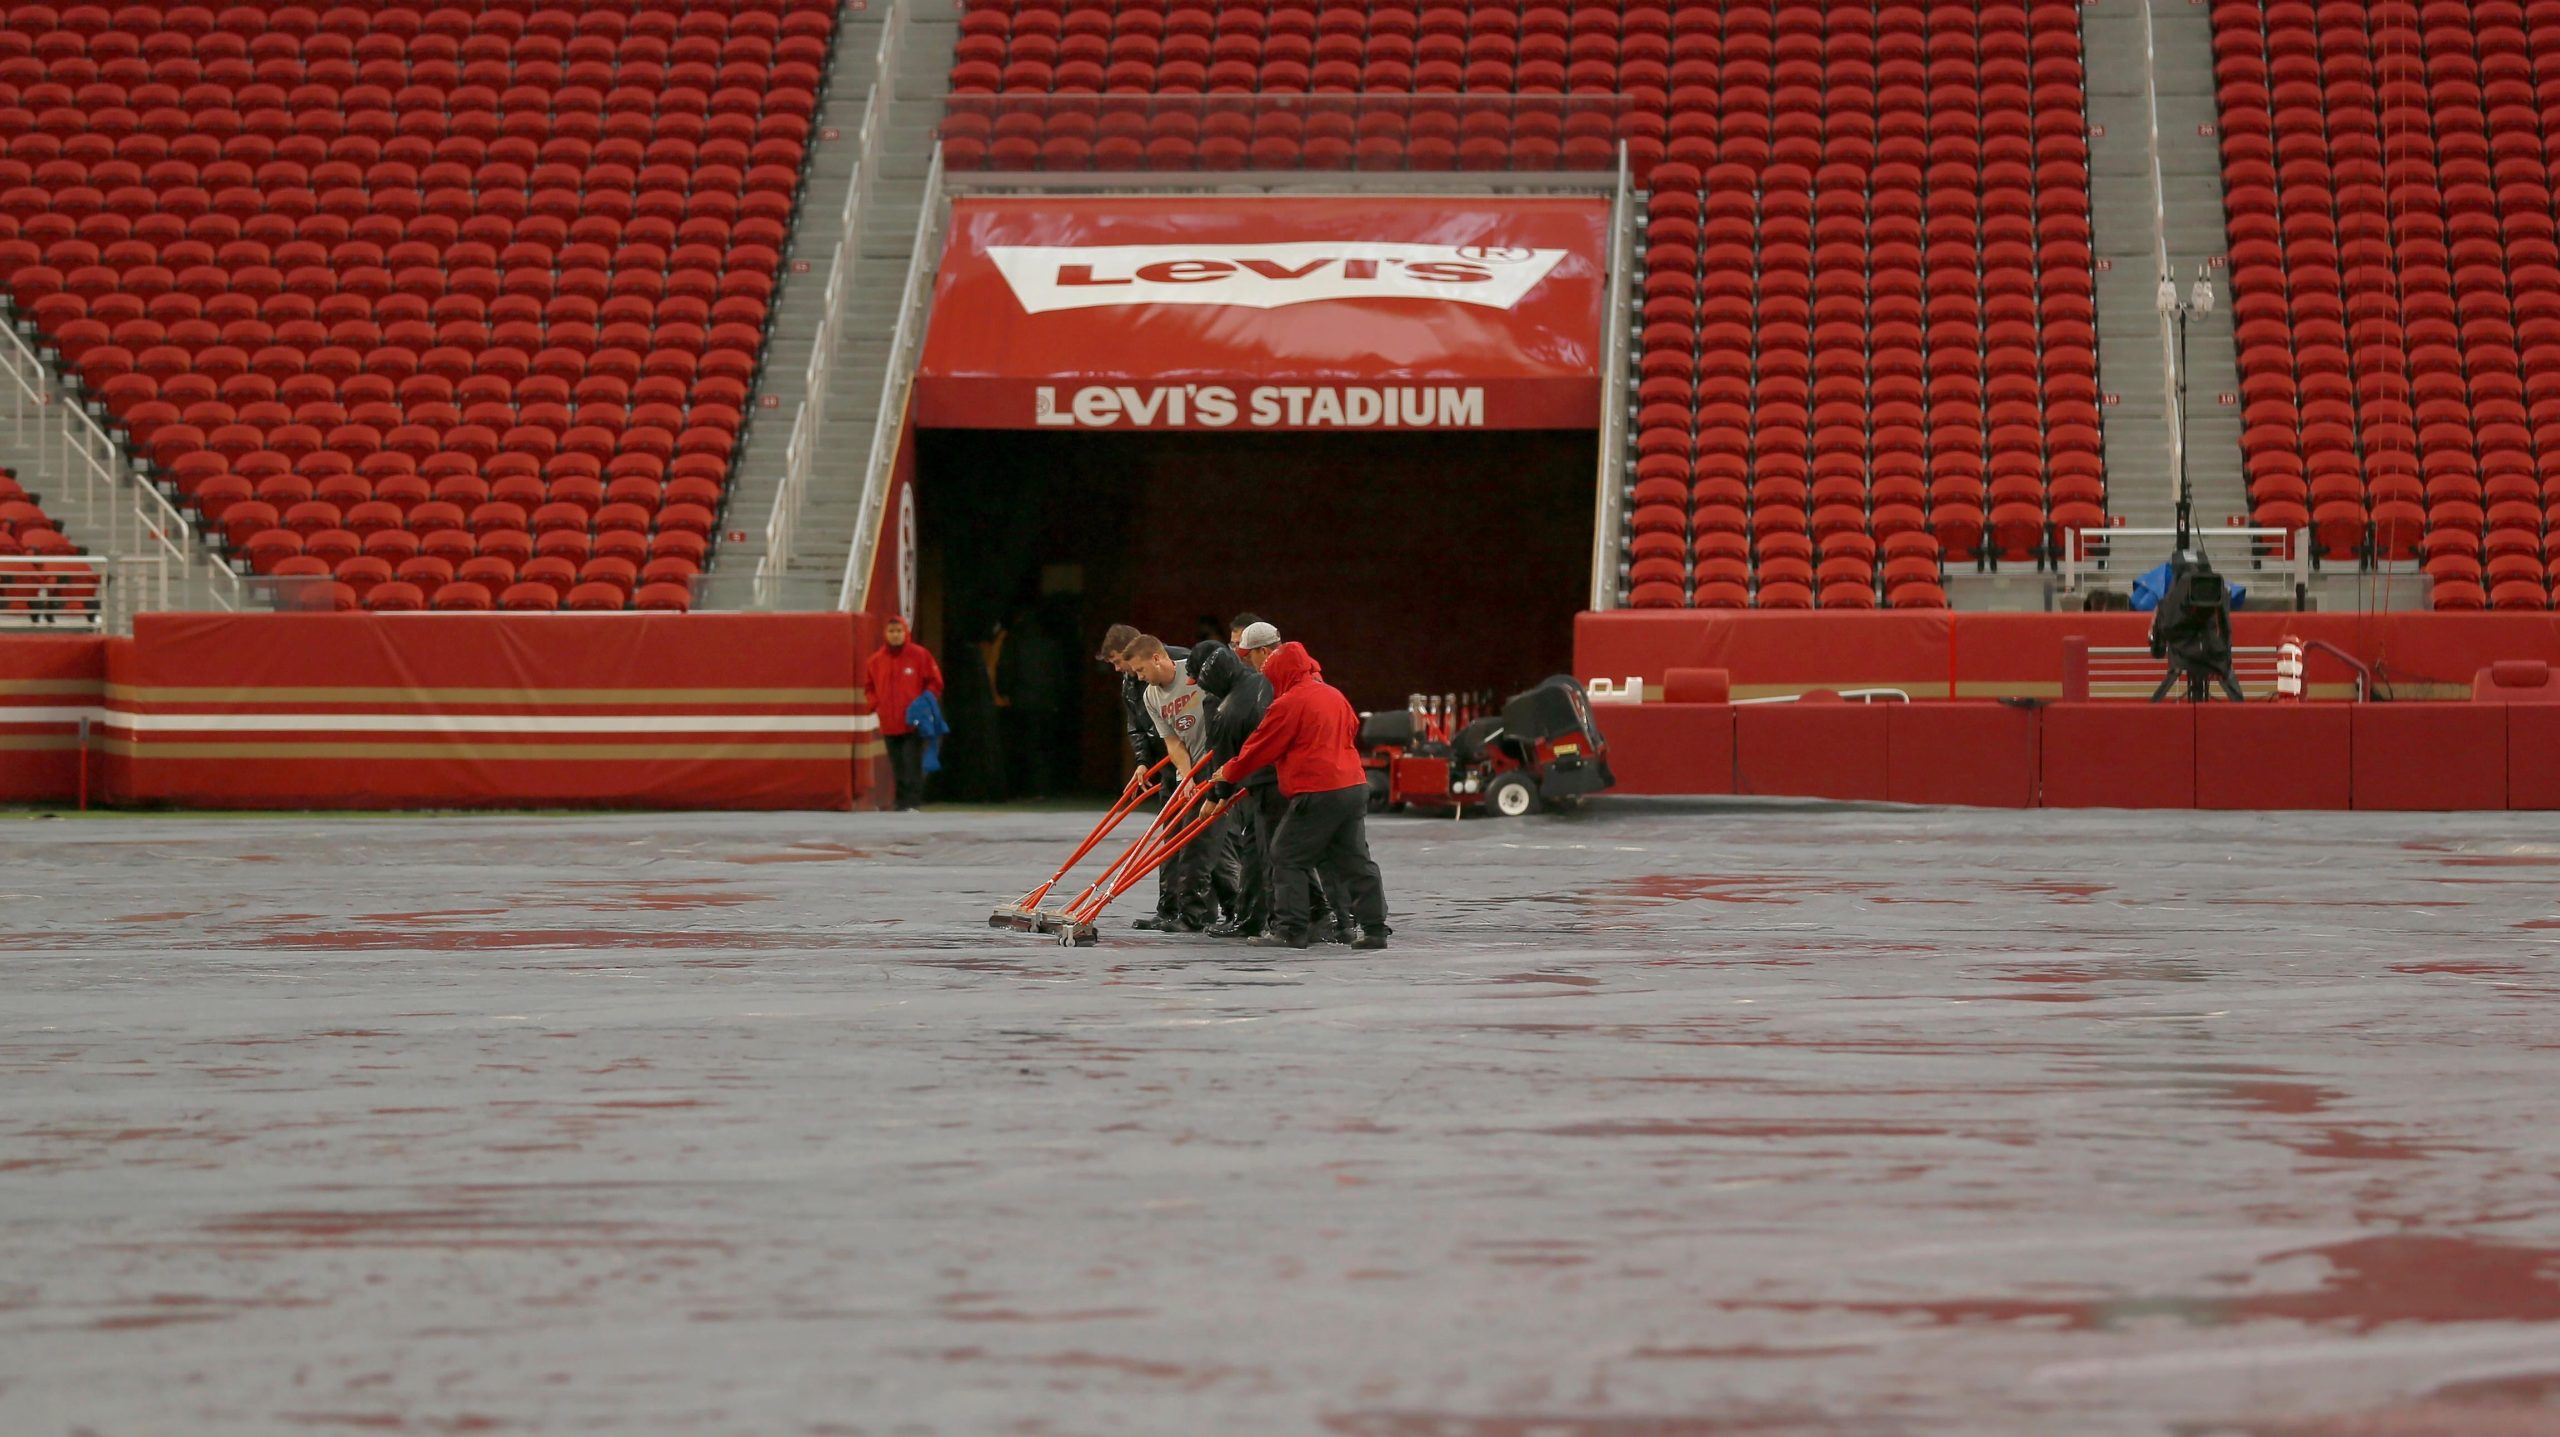 Workers push water off a tarp covering the field from rain at Levi's Stadium before an NFL football game between the San Francisco 49ers and the Indianapolis Colts in Santa Clara, California. (Photo: Jed Jacobsohn, AP)